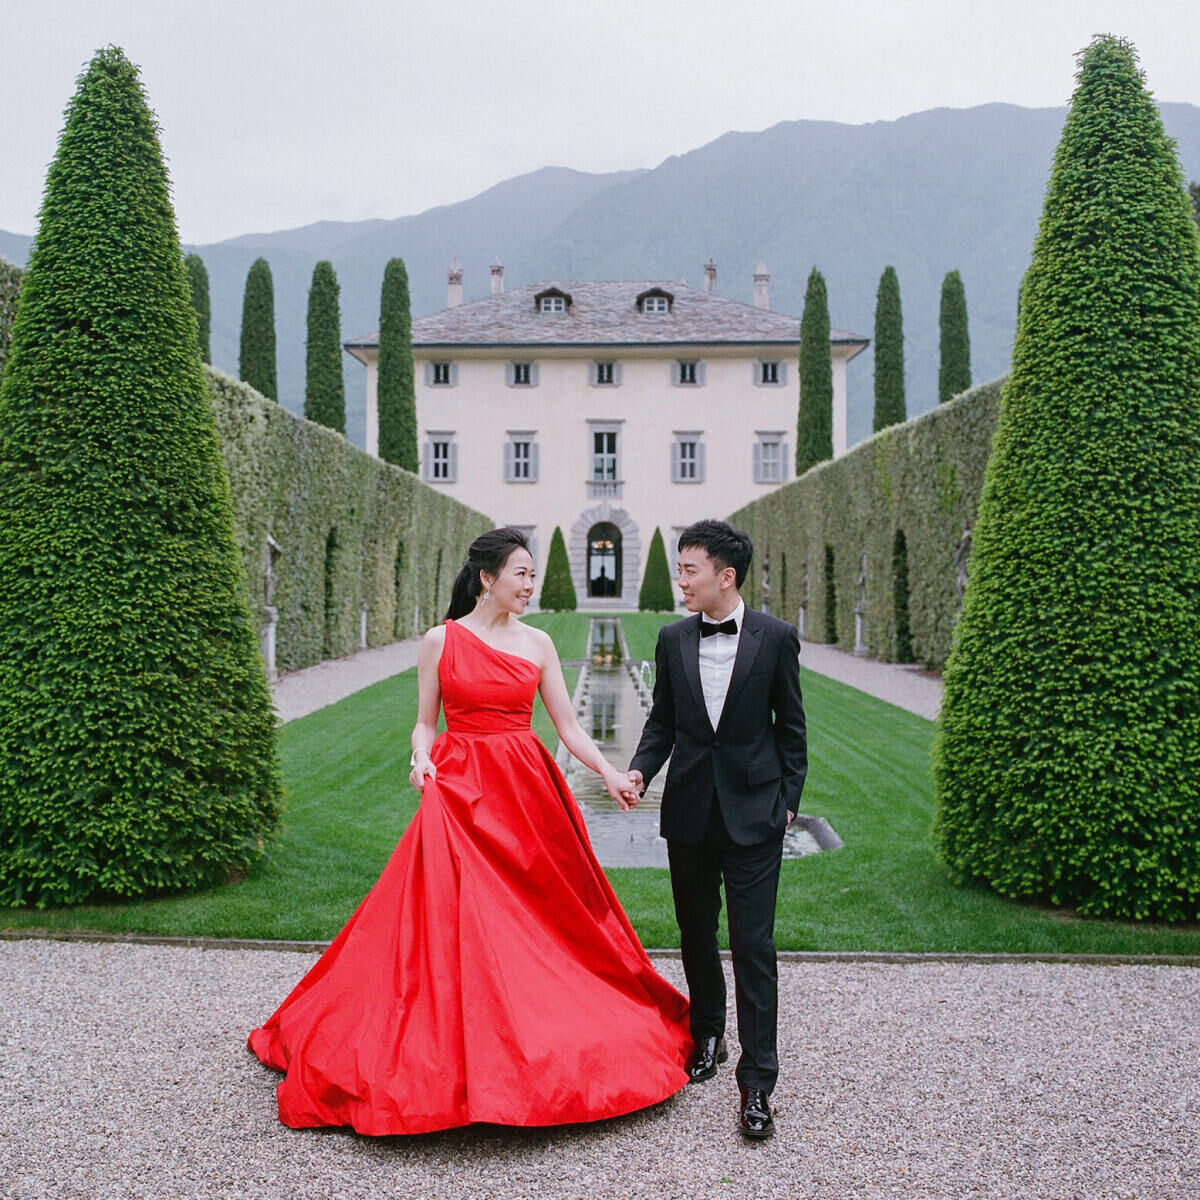 Bride in red wedding dress, wedding couple holding hands in front of an estate. 